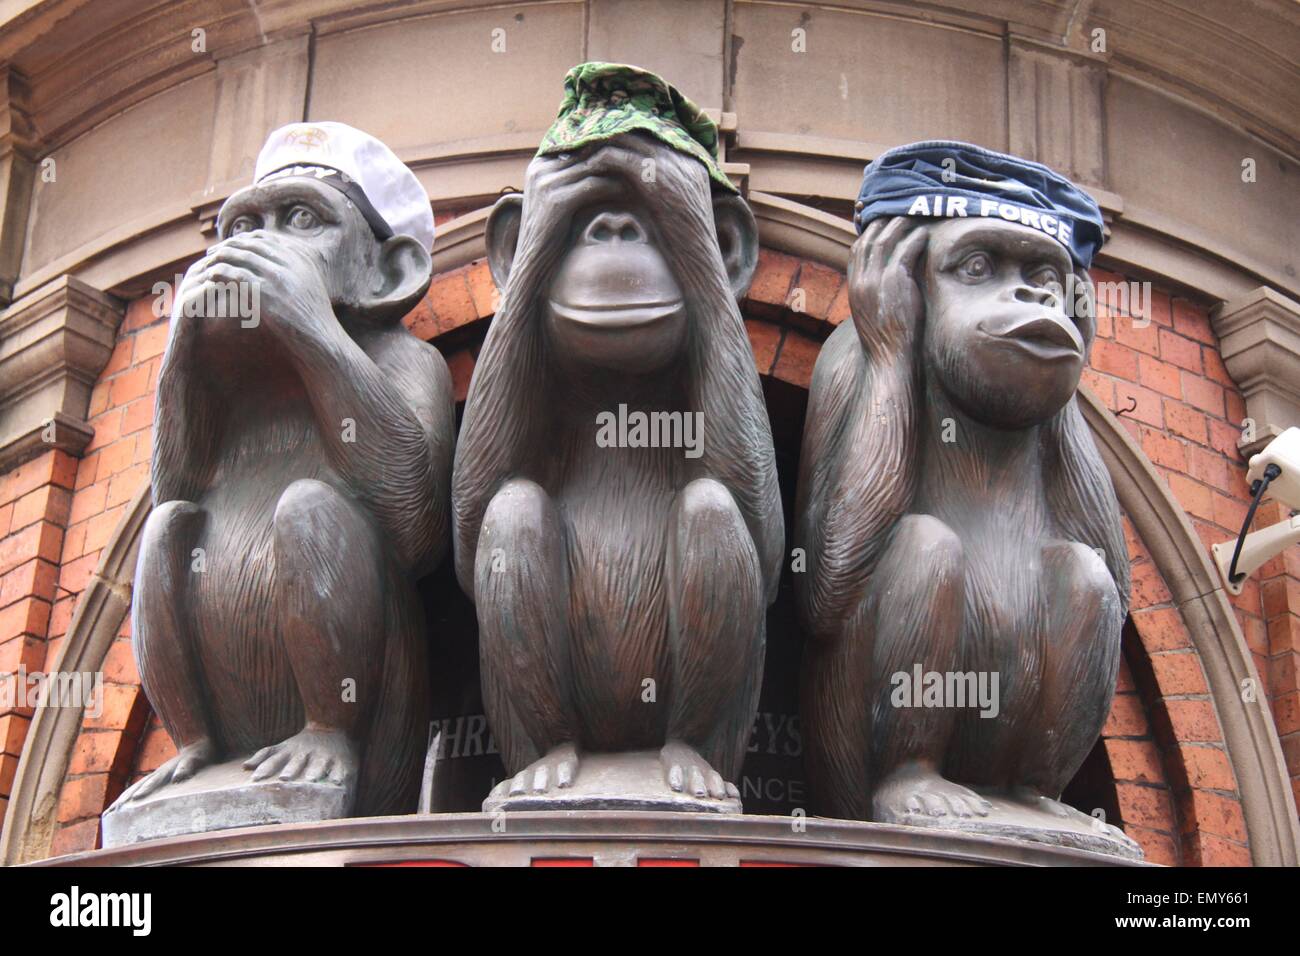 Sydney, Australia. 24 April 2015. The three monkeys wear hats representing the navy, army and air force at the 3 Wise Monkeys pub at 555 George St, Sydney ahead of ANZAC Day. Credit: Richard Milnes/Alamy Live News Stock Photo